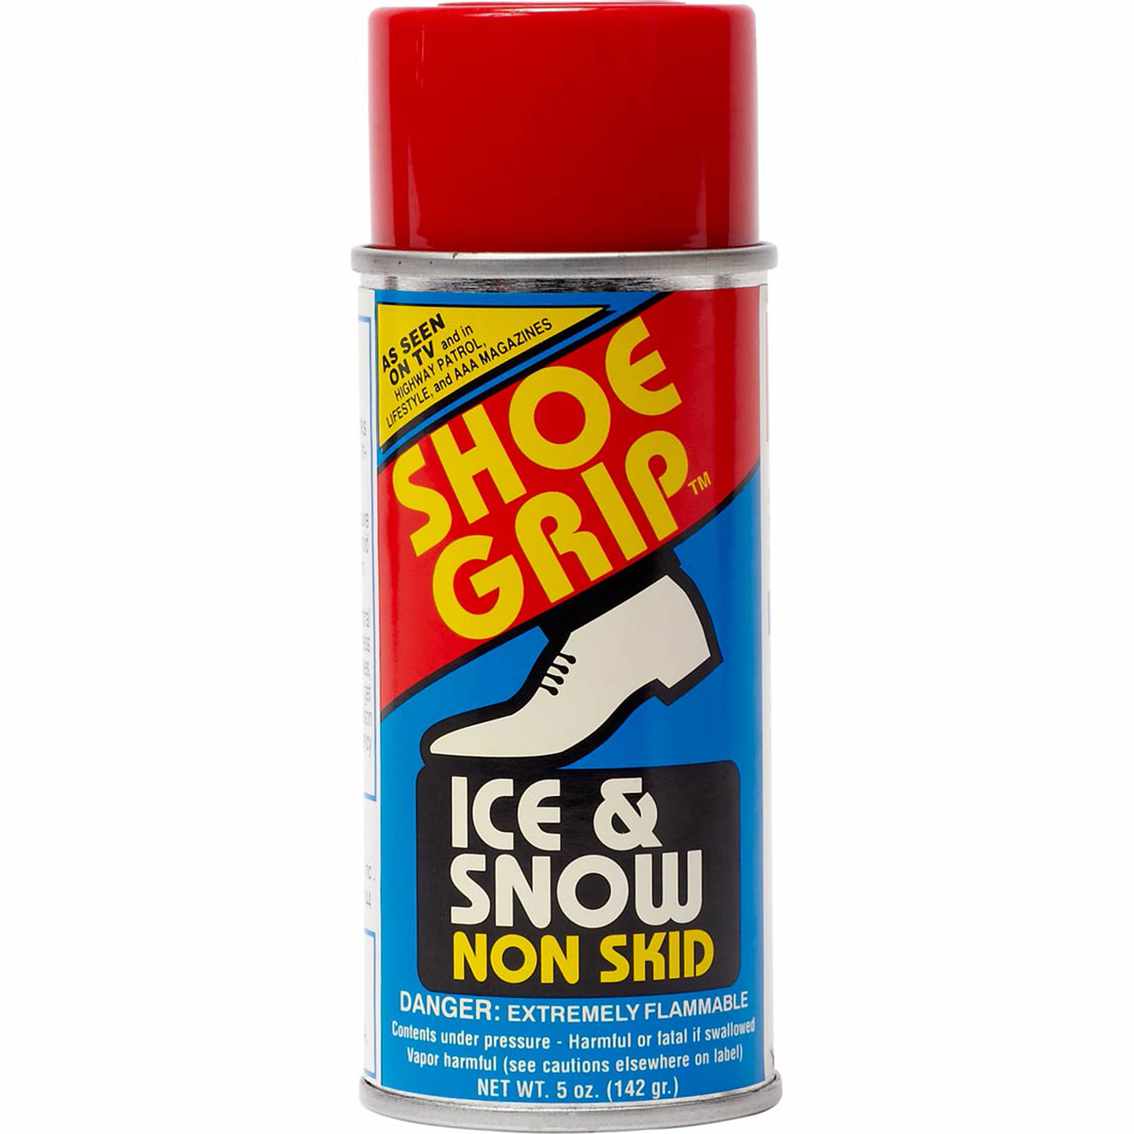 Canister of Shoe Grip brand ice and snow non skit non-slip shoe spray.